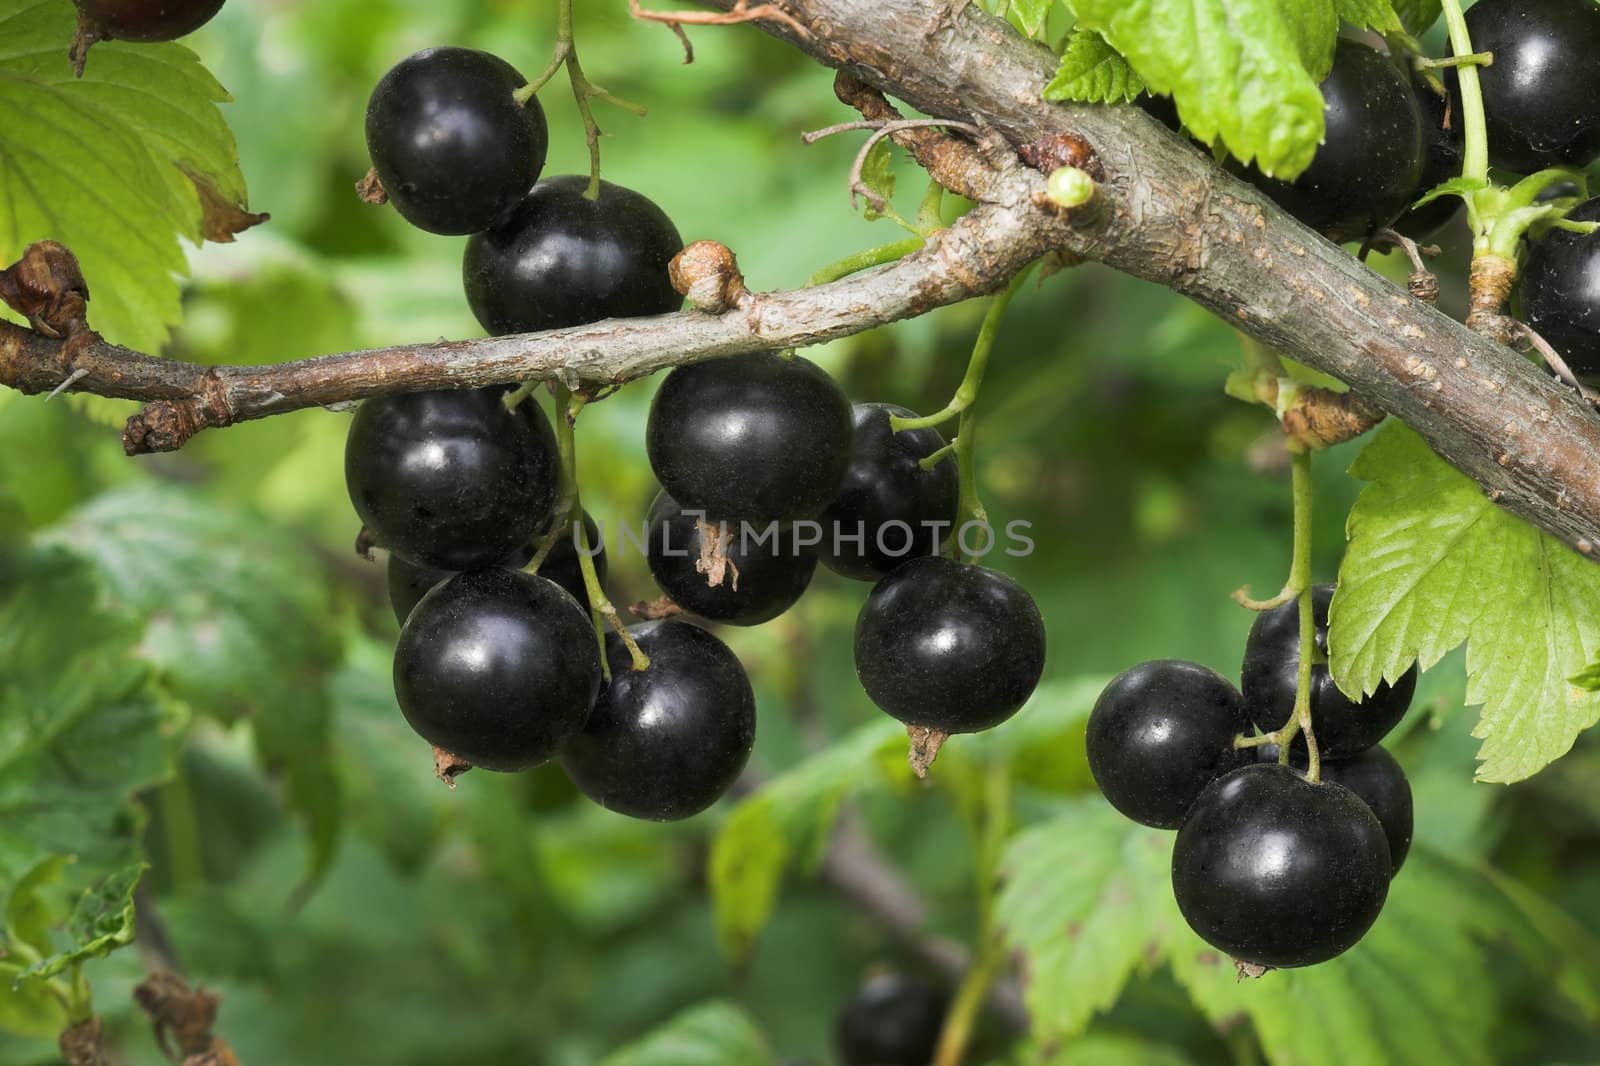 The ripened black currant on a branch